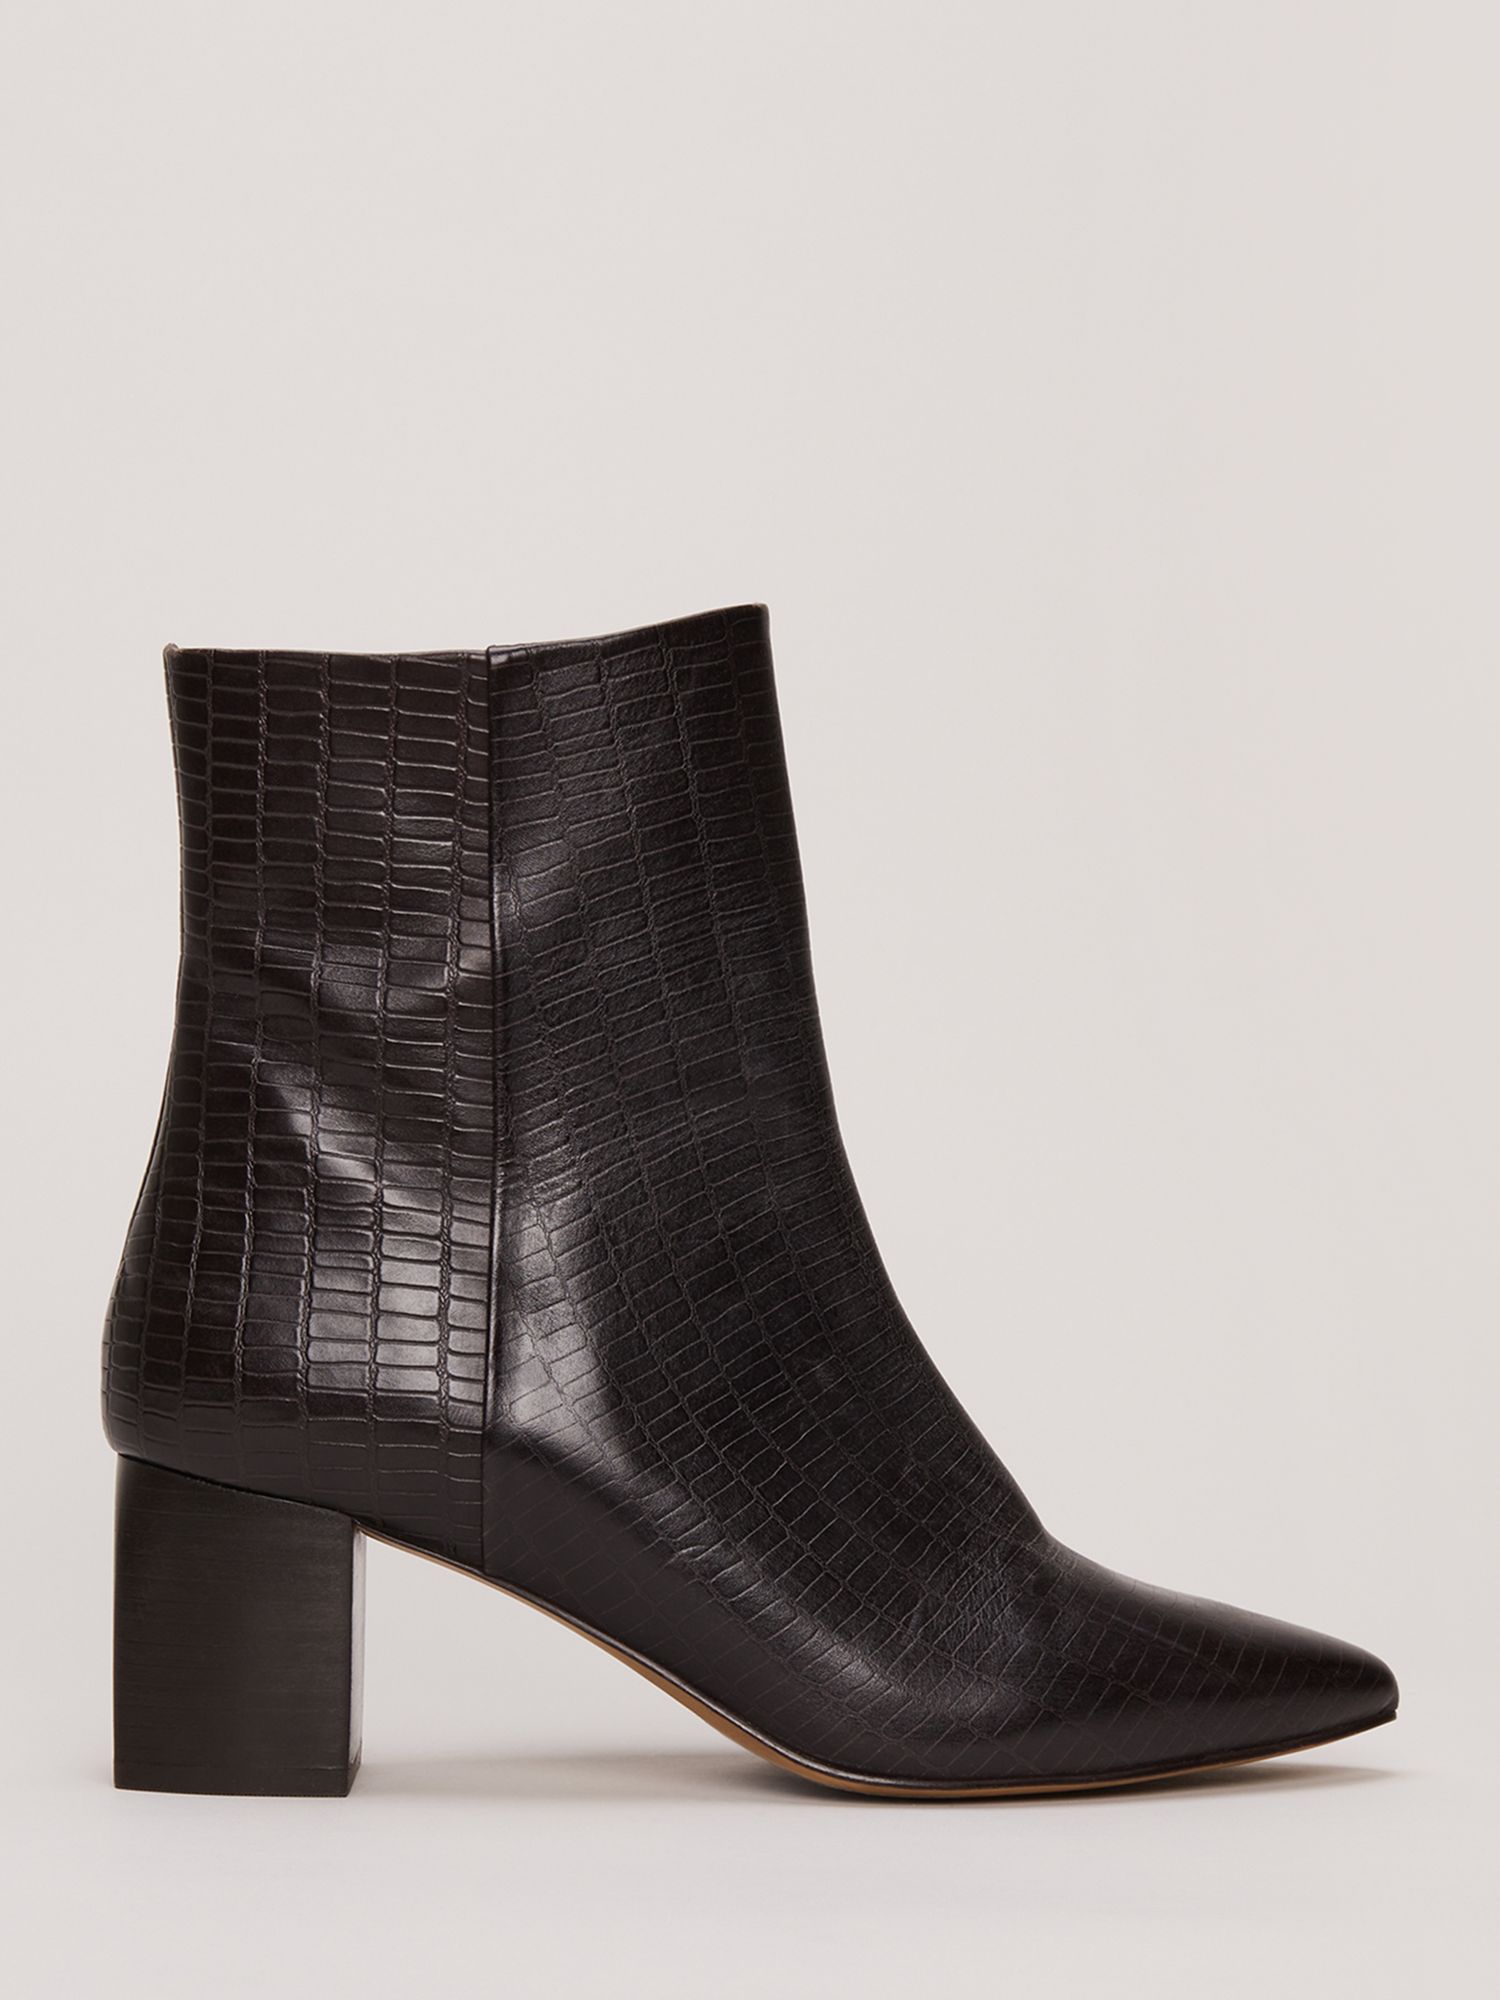 Buy Mango Leather Ankle Boots, Black Online at johnlewis.com